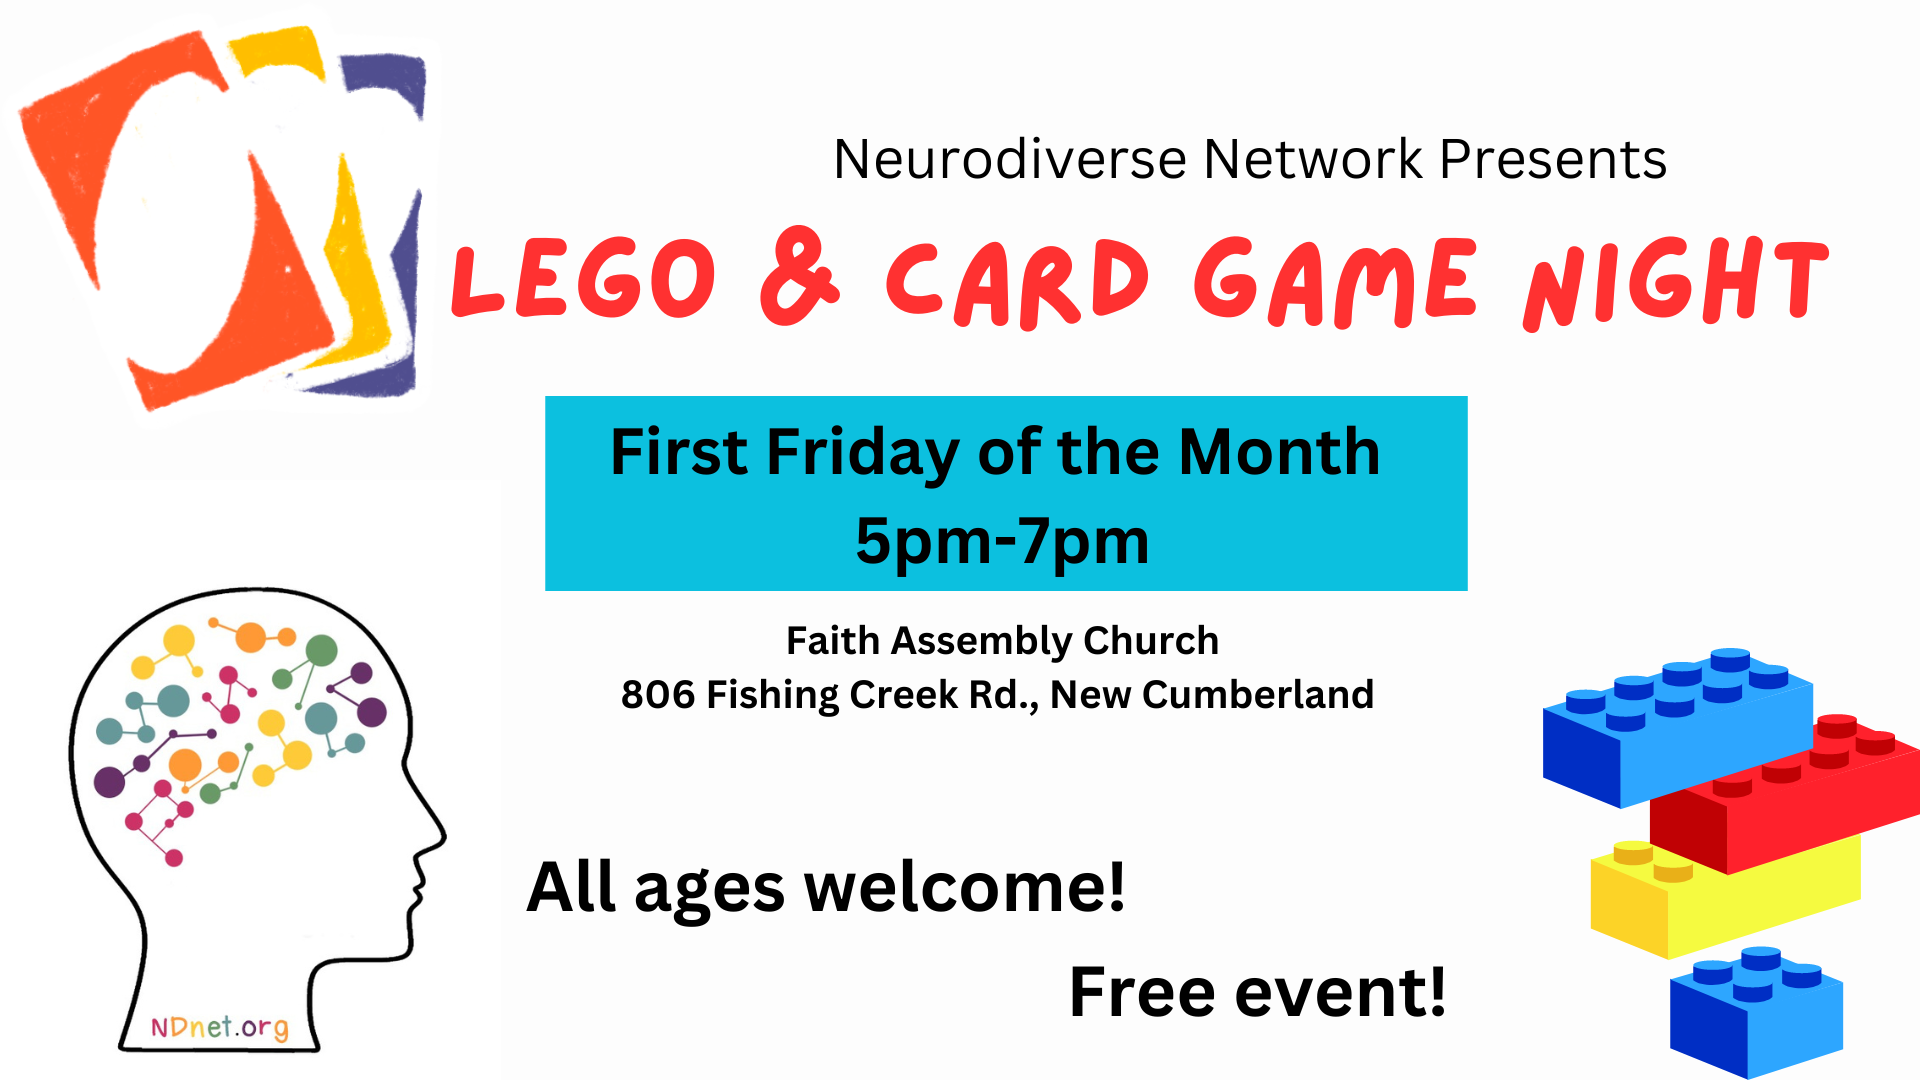 Lego card game night for all ages in new cumberland pa free events kids family community church groups support parenting social groups special needs adhd autistic